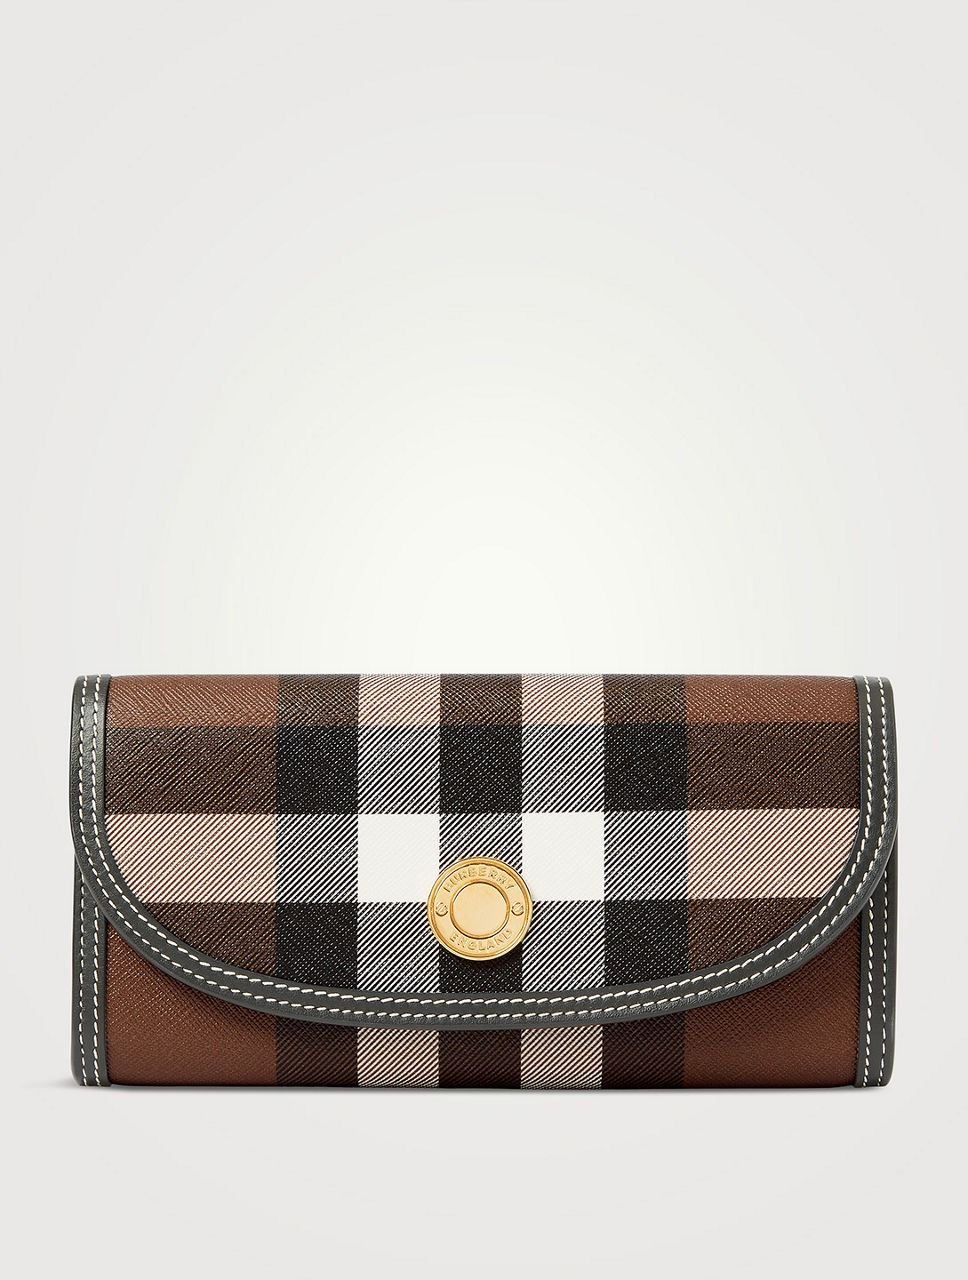 Burberry Check Leather Bifold Coin Wallet in Vine - Men